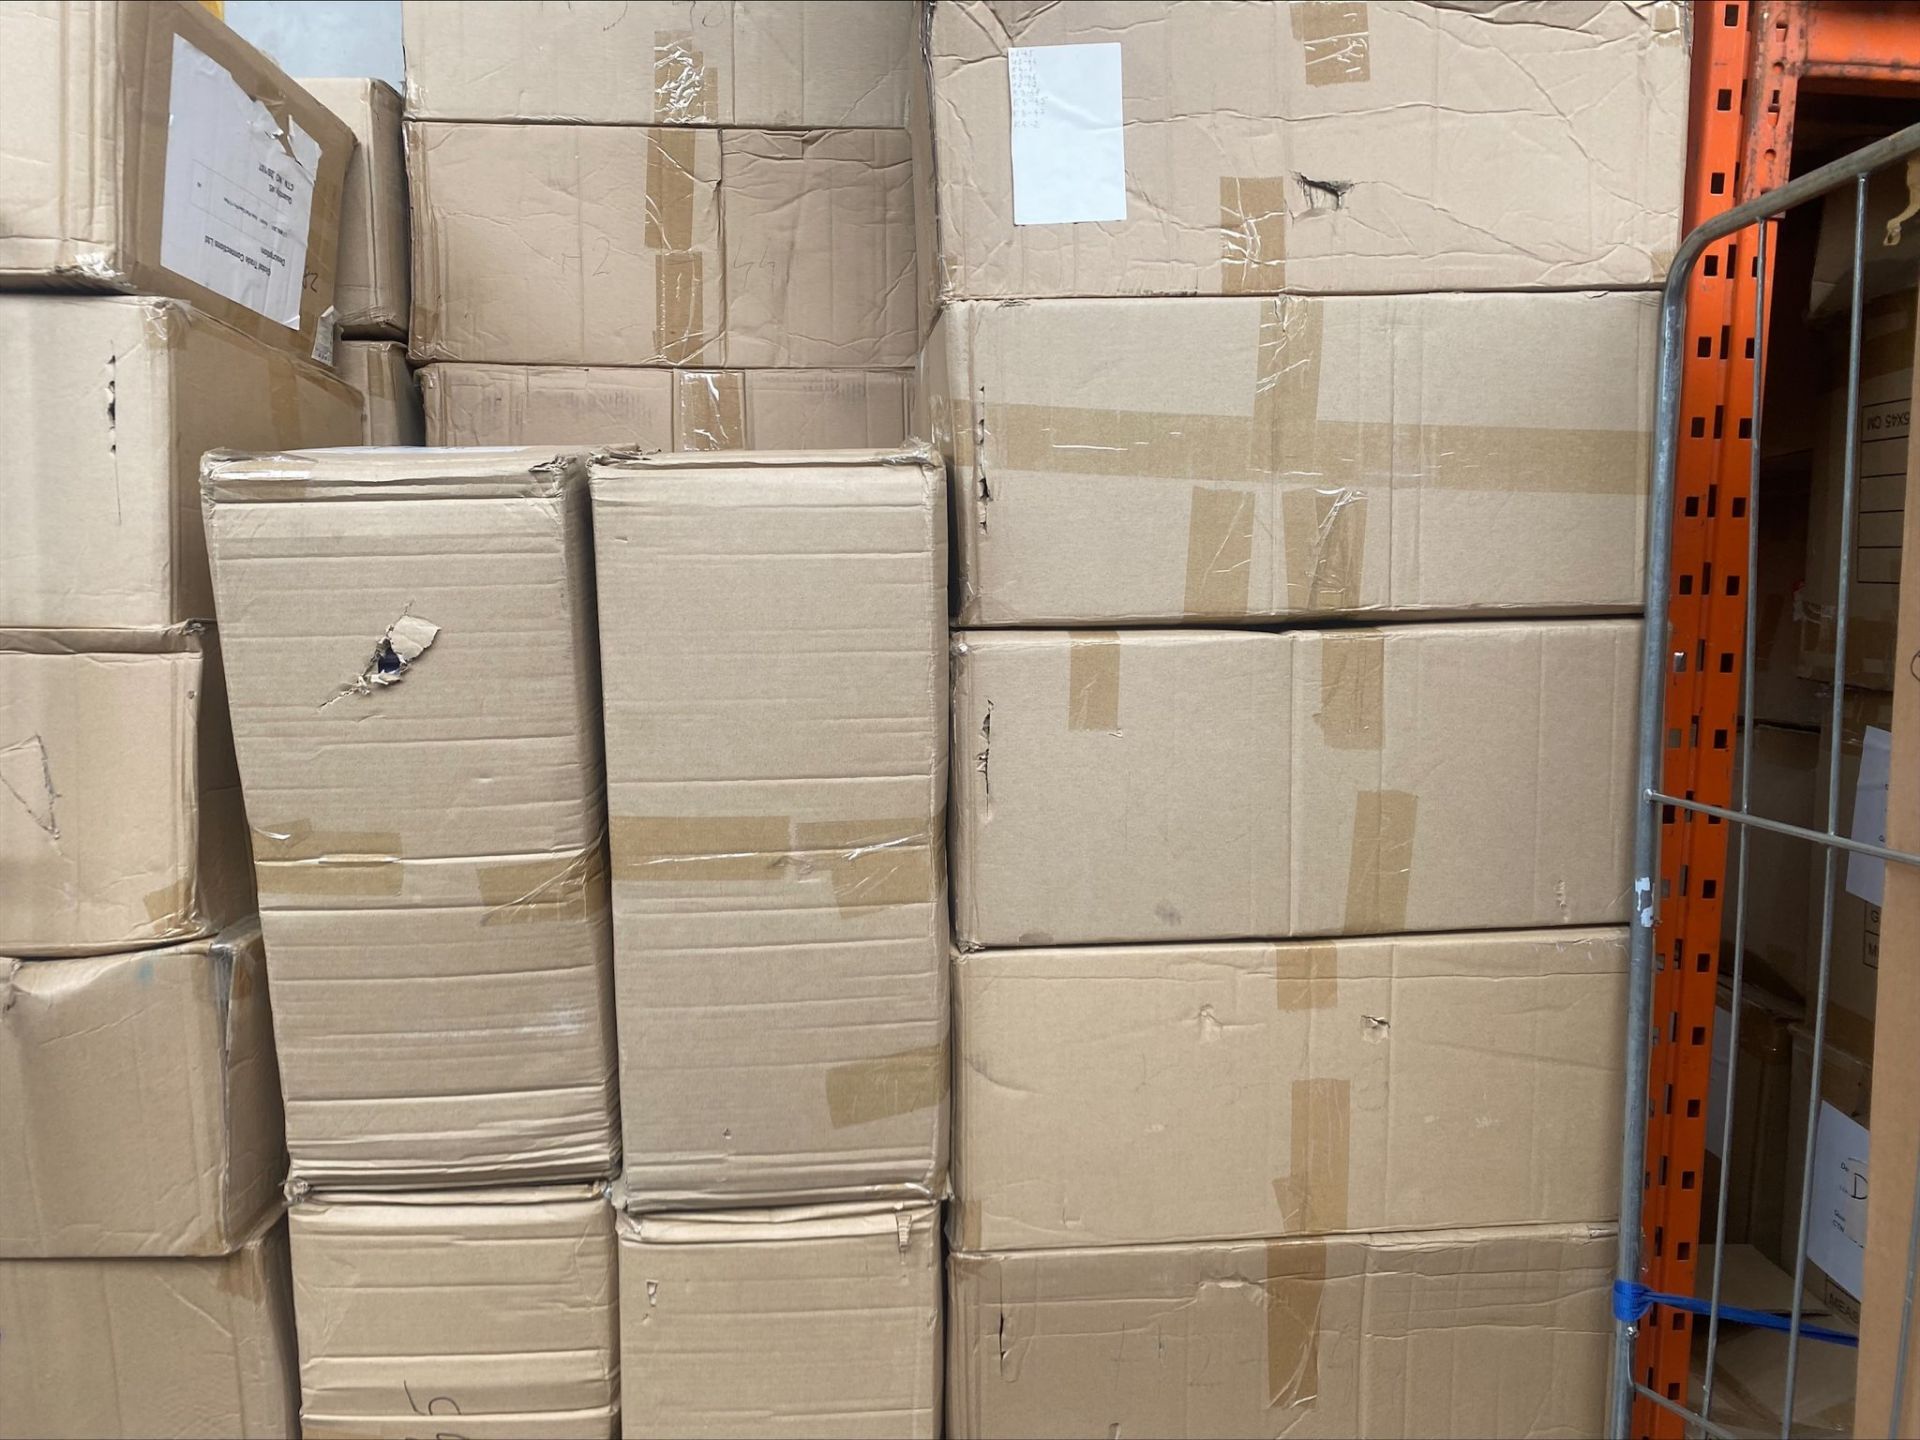 Pallet of New iPhone, Samsung, Airpod, Apple Watch, Charging Cables, Cases, Covers & Accessories - Image 16 of 16